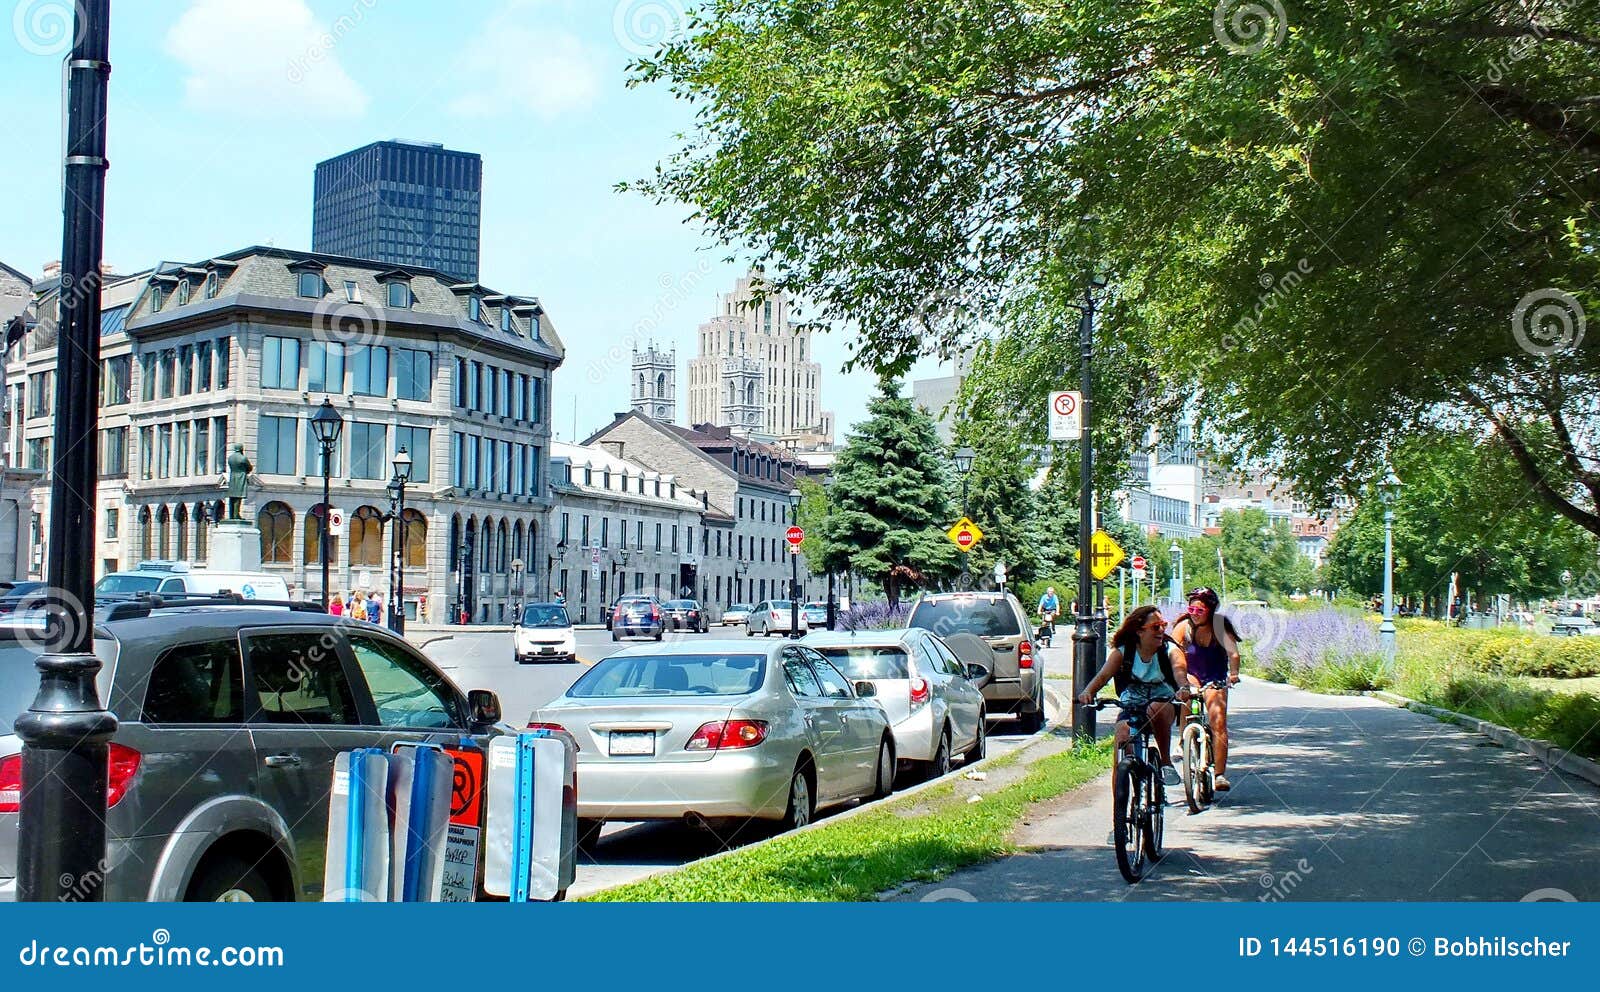 old montreal bike tours